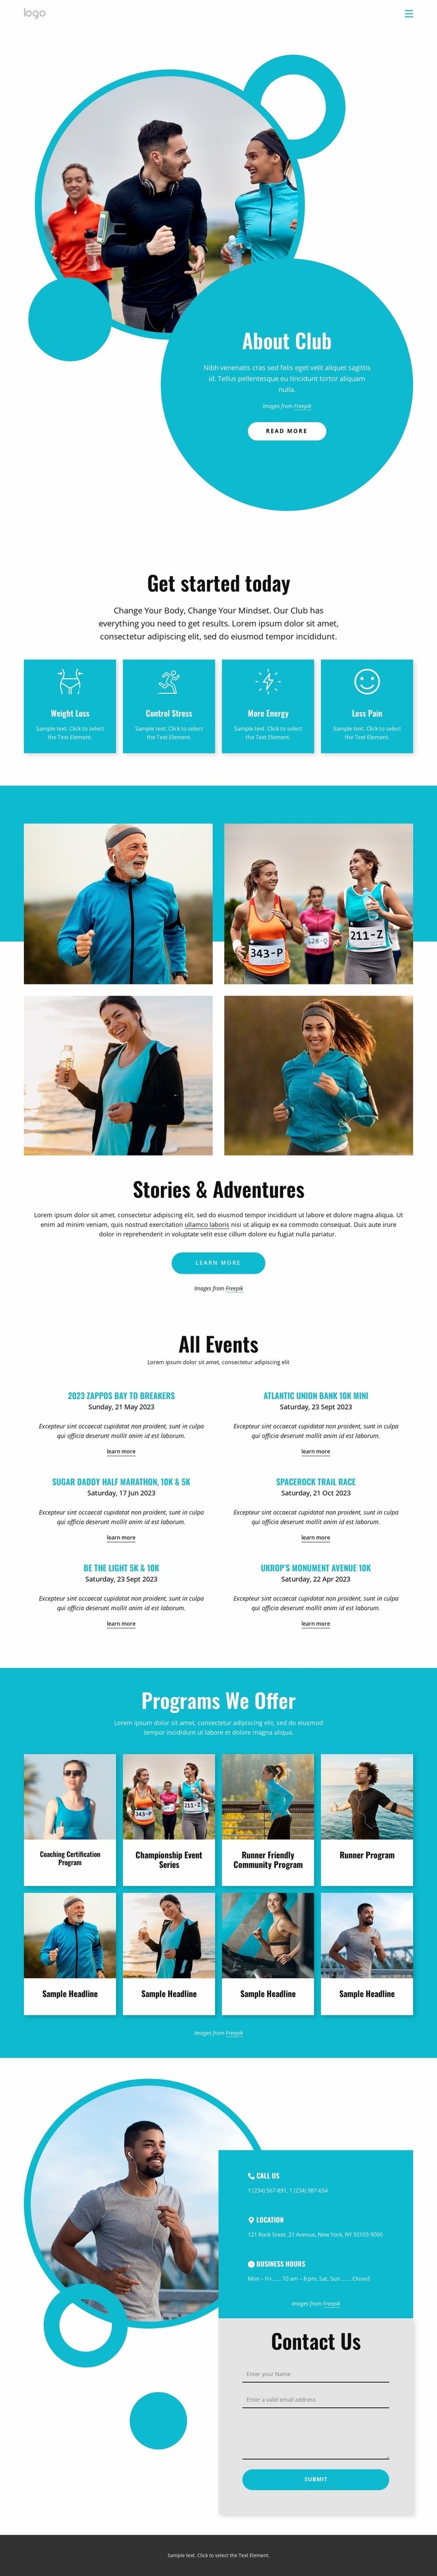 Running club activities Web Page Design